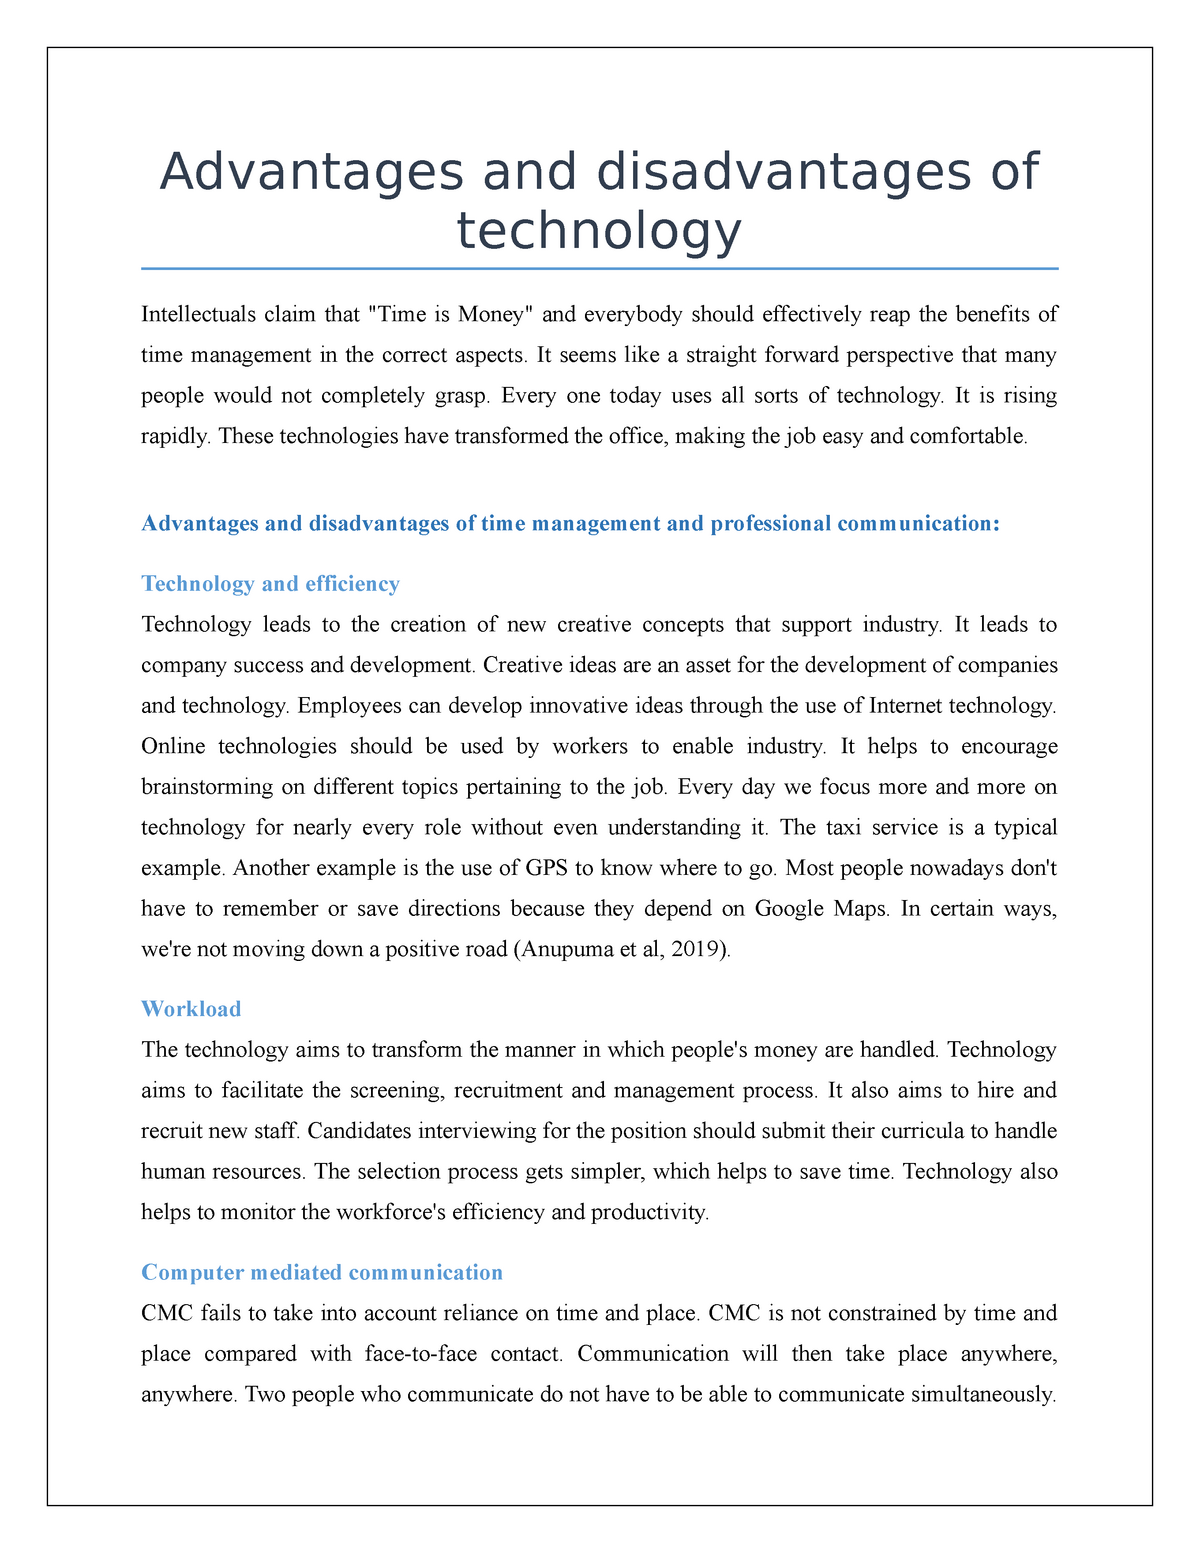 research paper about the advantages and disadvantages of technology